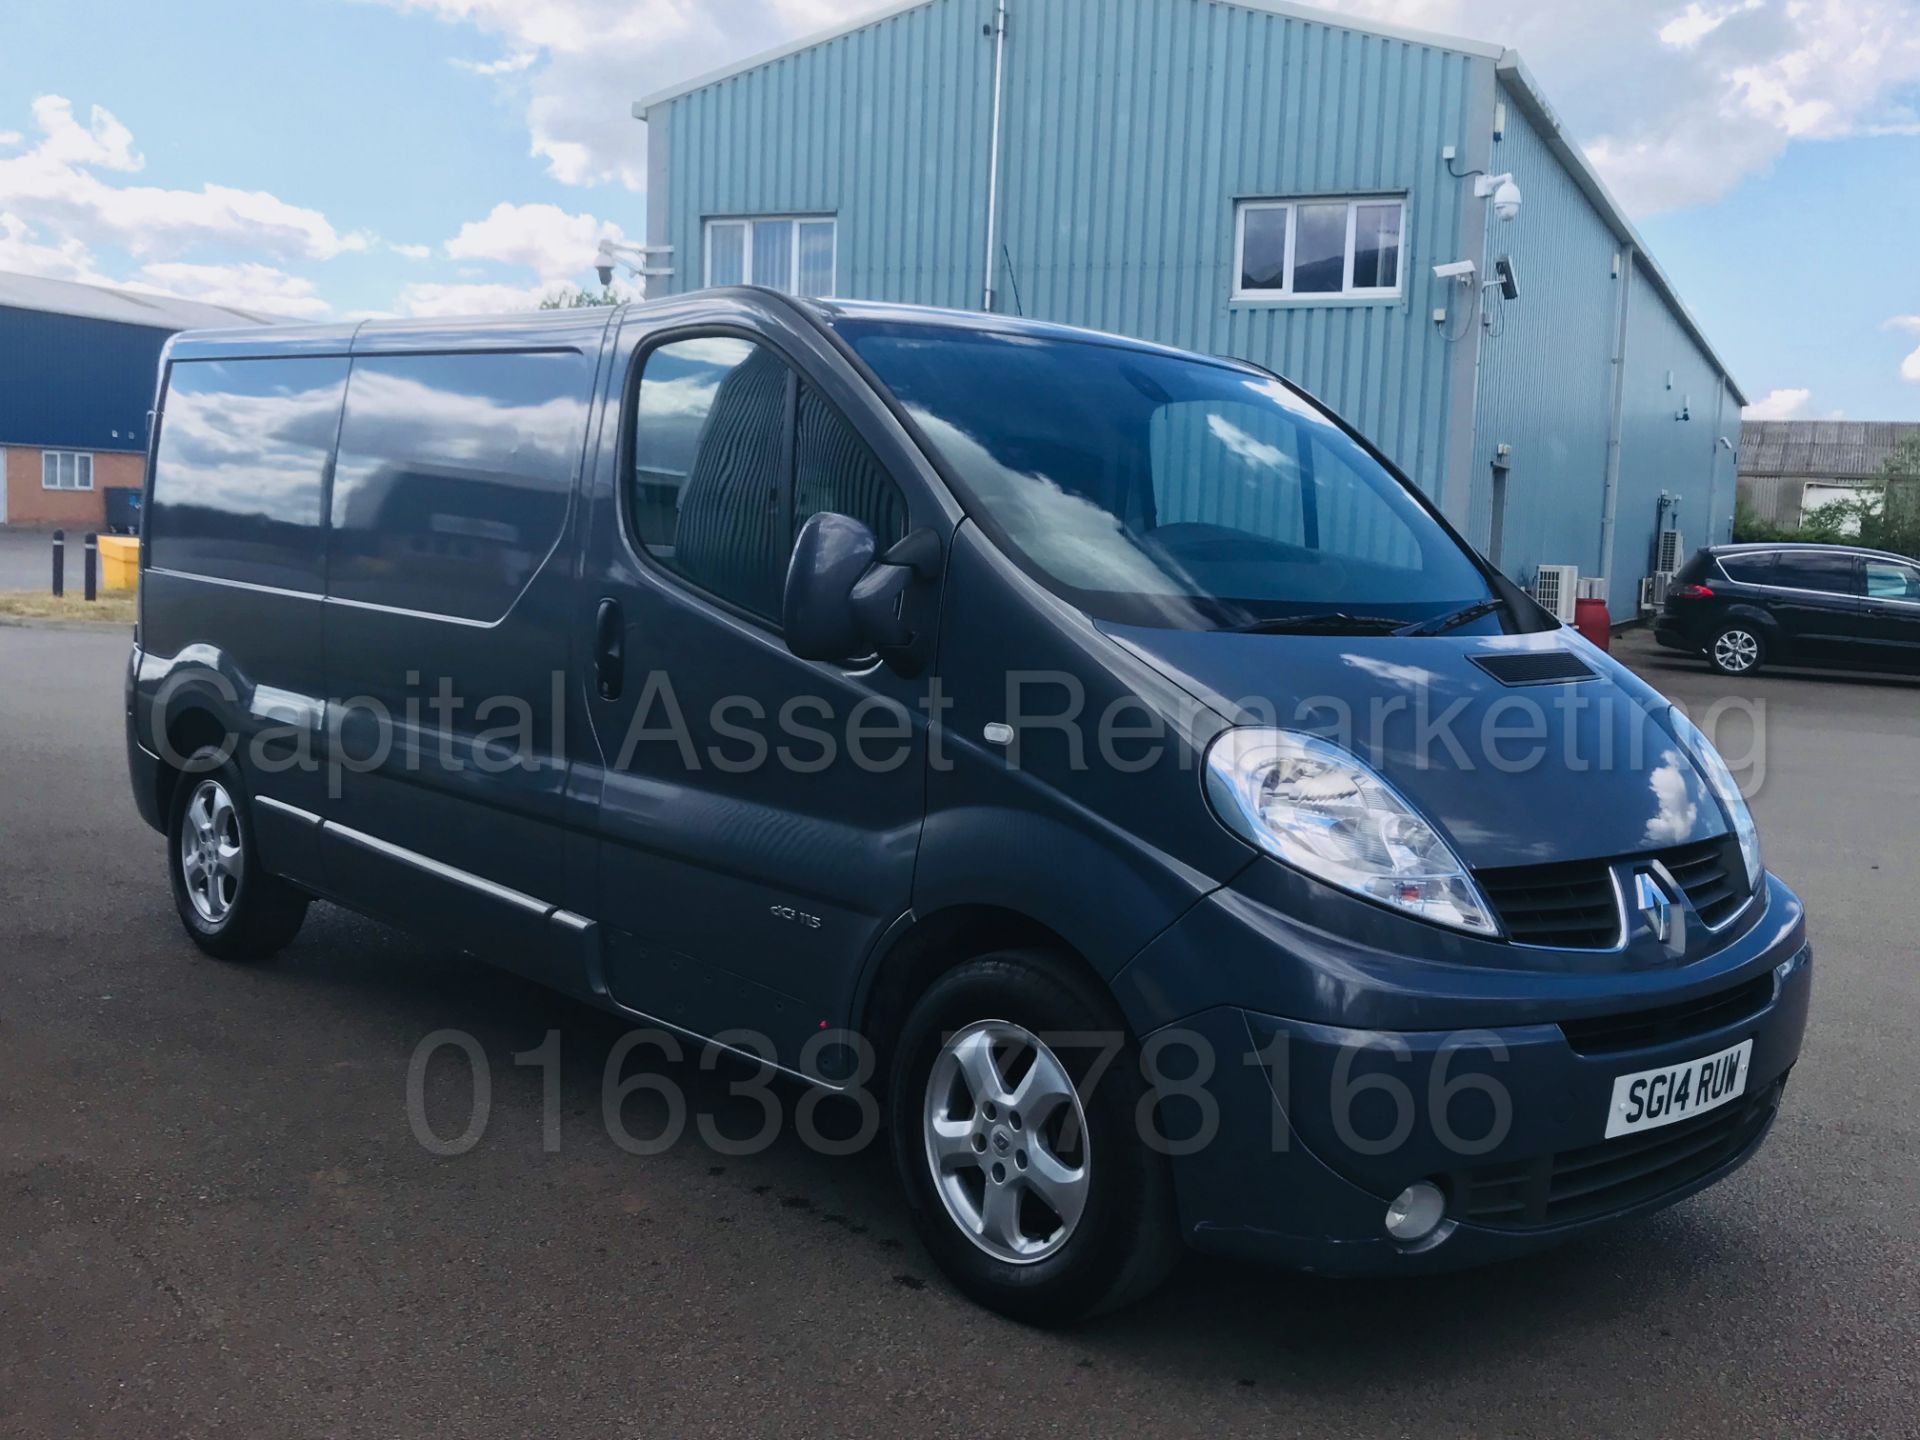 (On Sale) RENAULT TRAFIC 'SPORT EDITION' LWB (2014) '2.0 DCI - 115 BHP - 6 SPEED' *AIR CON* (NO VAT) - Image 11 of 40